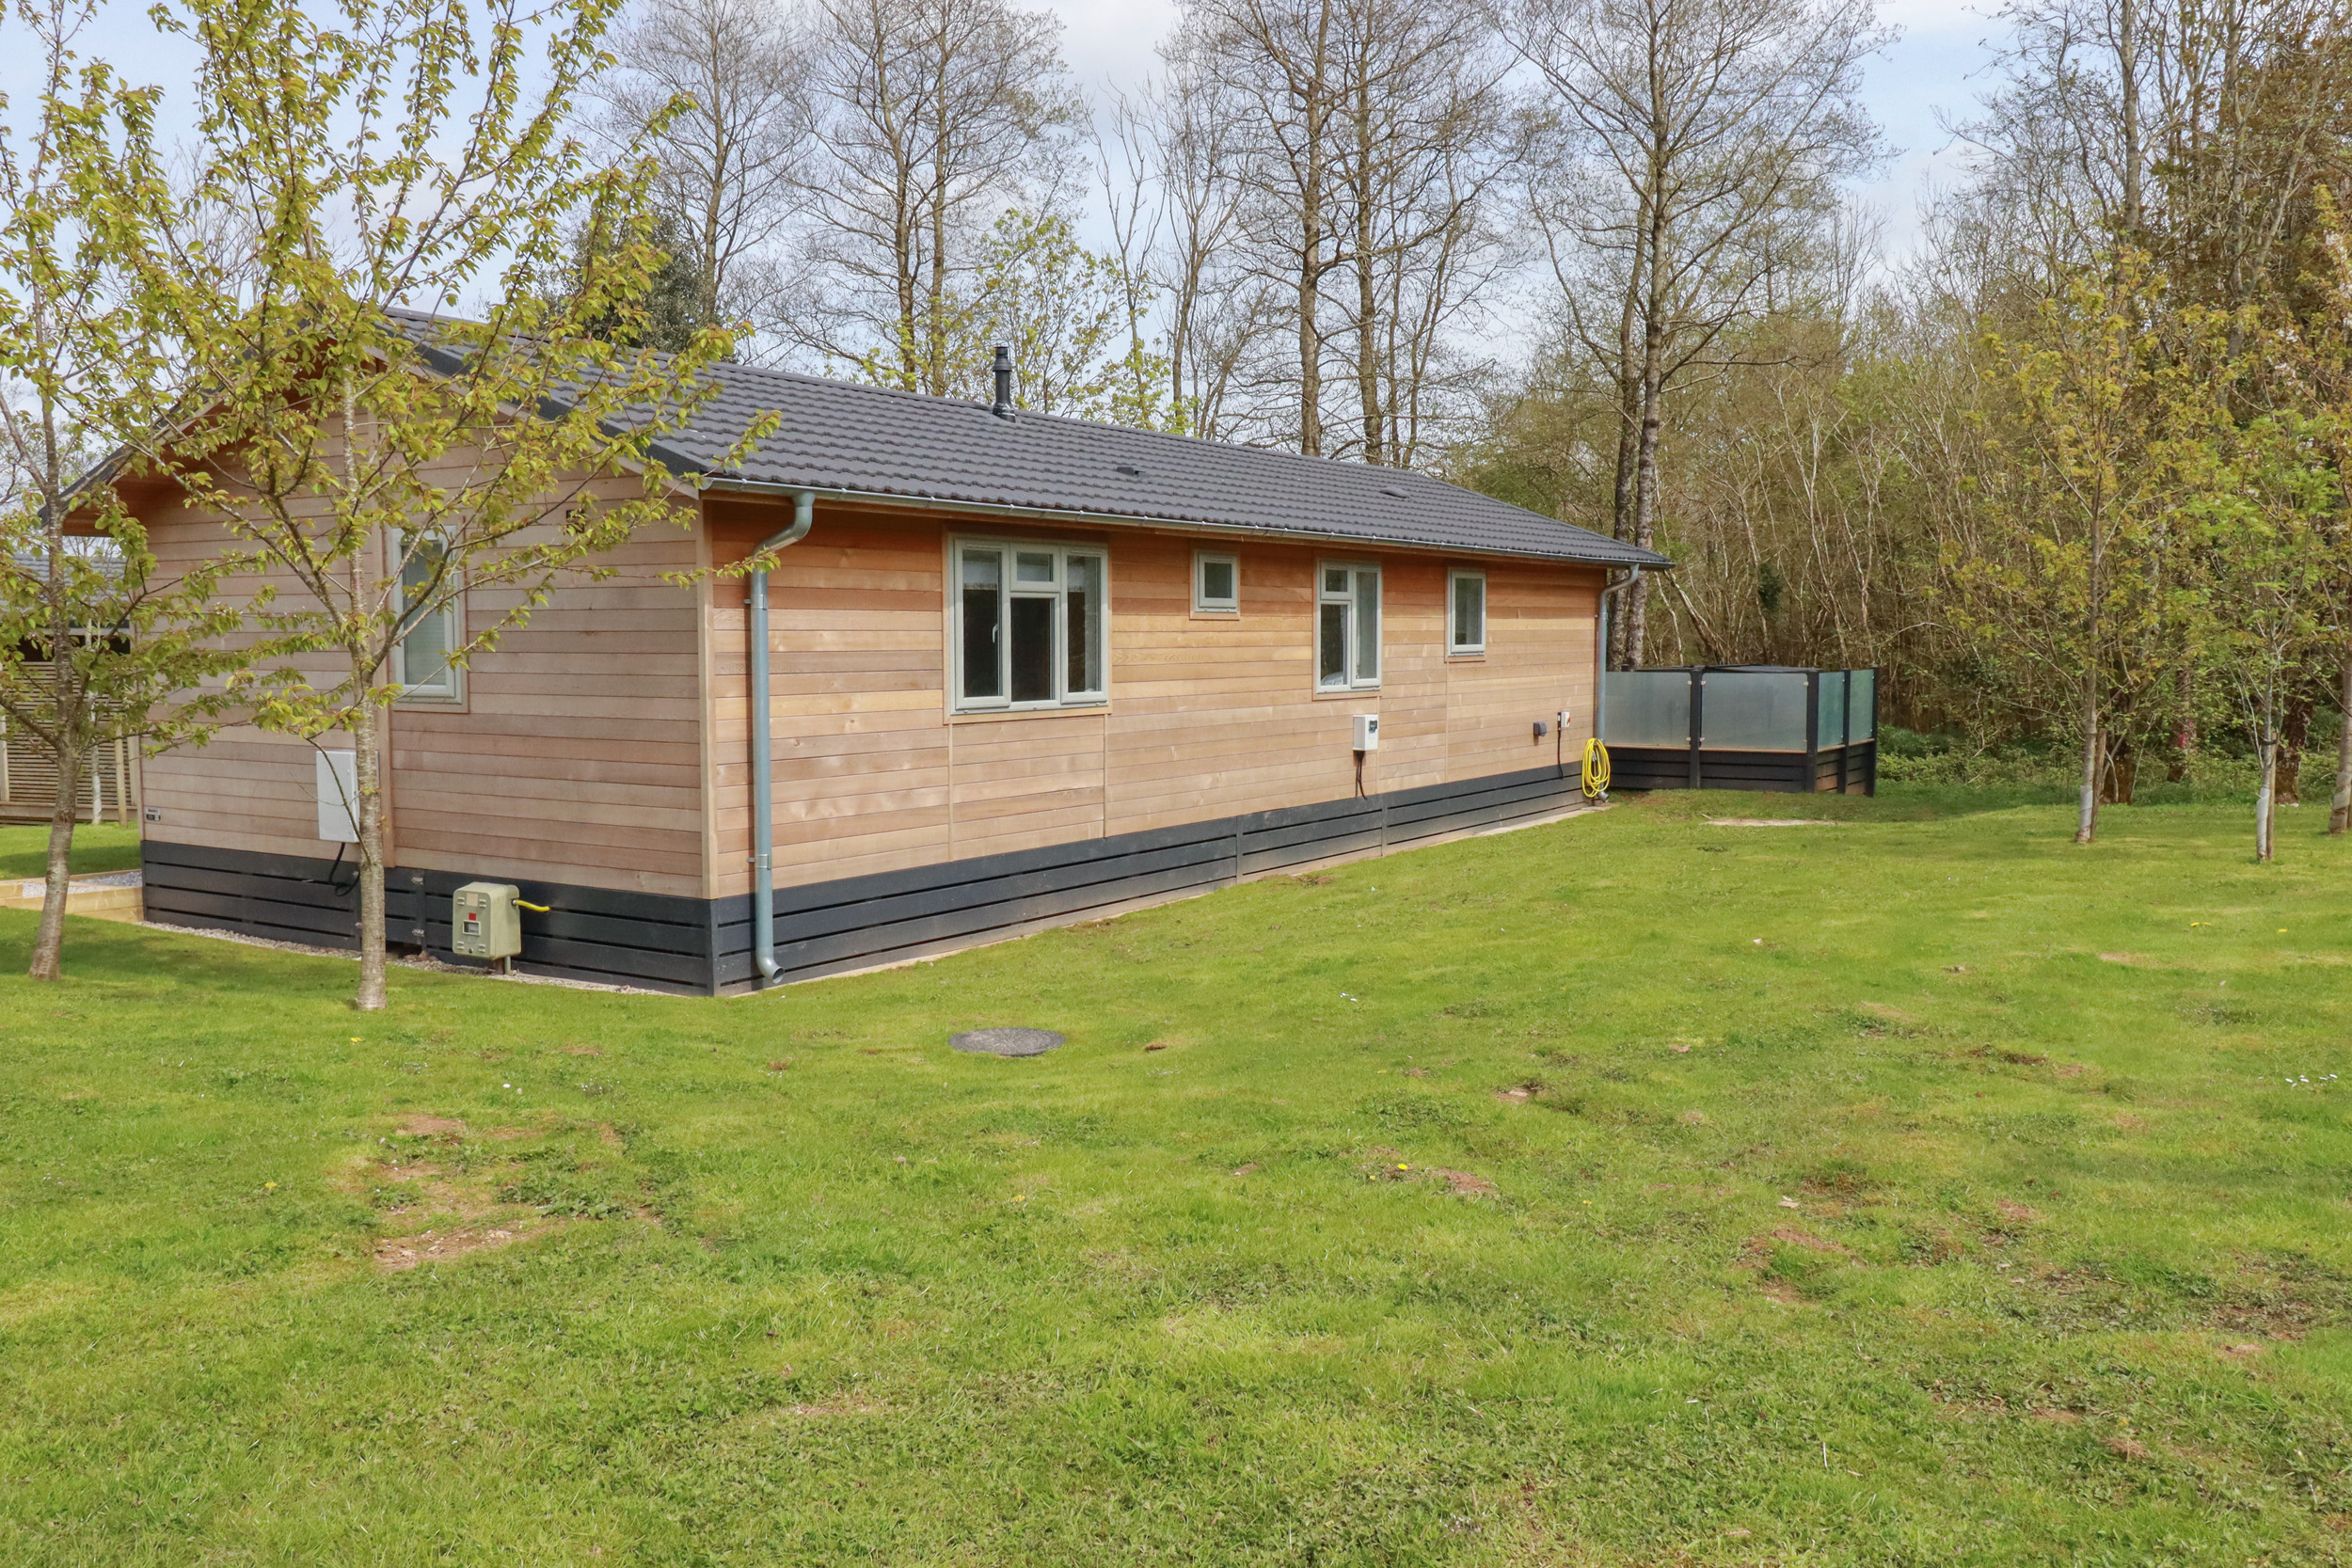 23 Meadow Retreat, in Dobwalls, Cornwall. Single-storey. One pet. Open-plan living. Private hot tub.